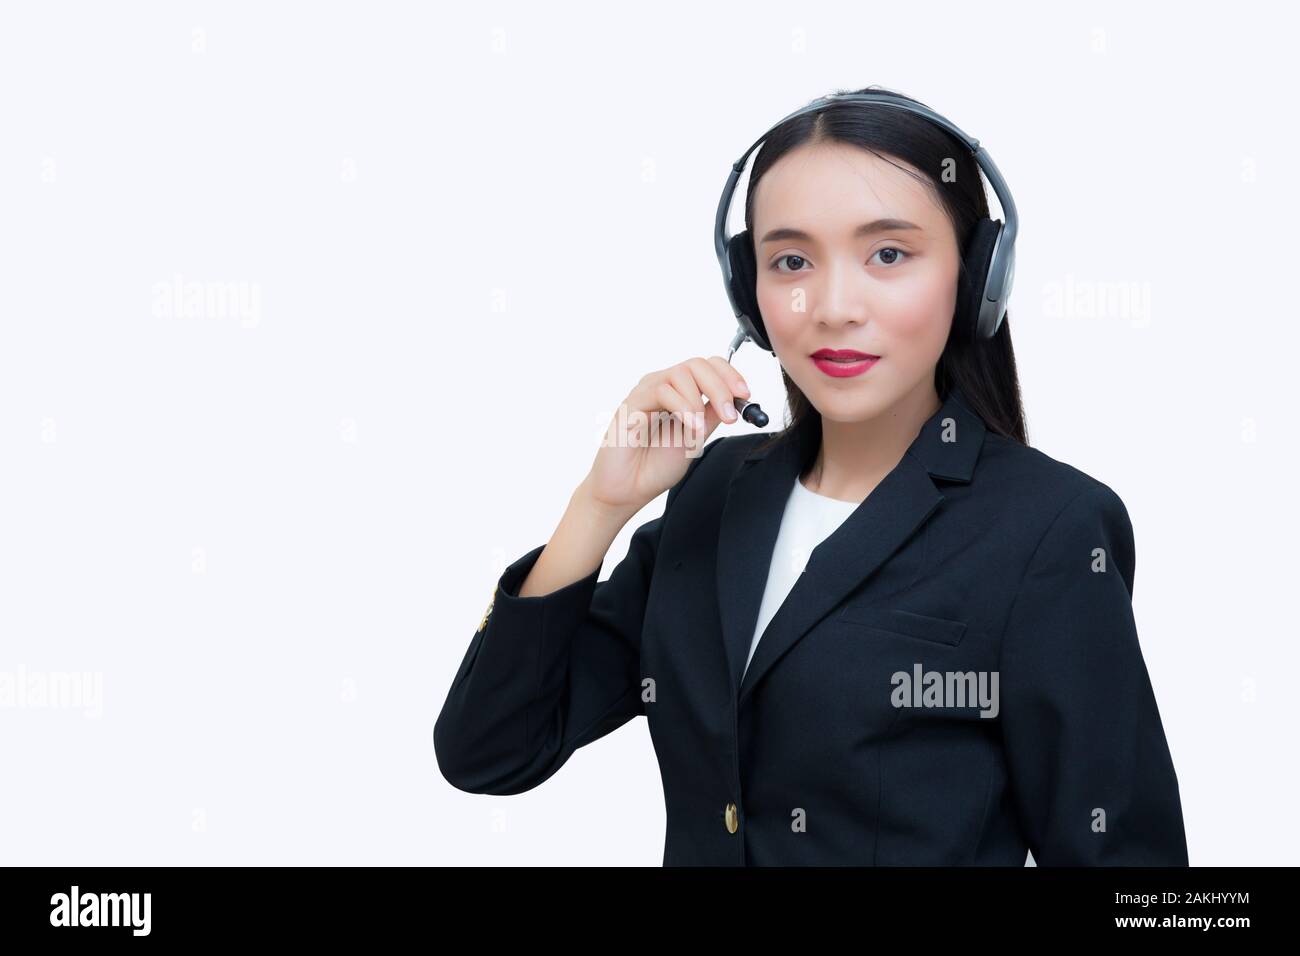 Beautiful asian woman smiling customer service talking on headset. business concept. Stock Photo